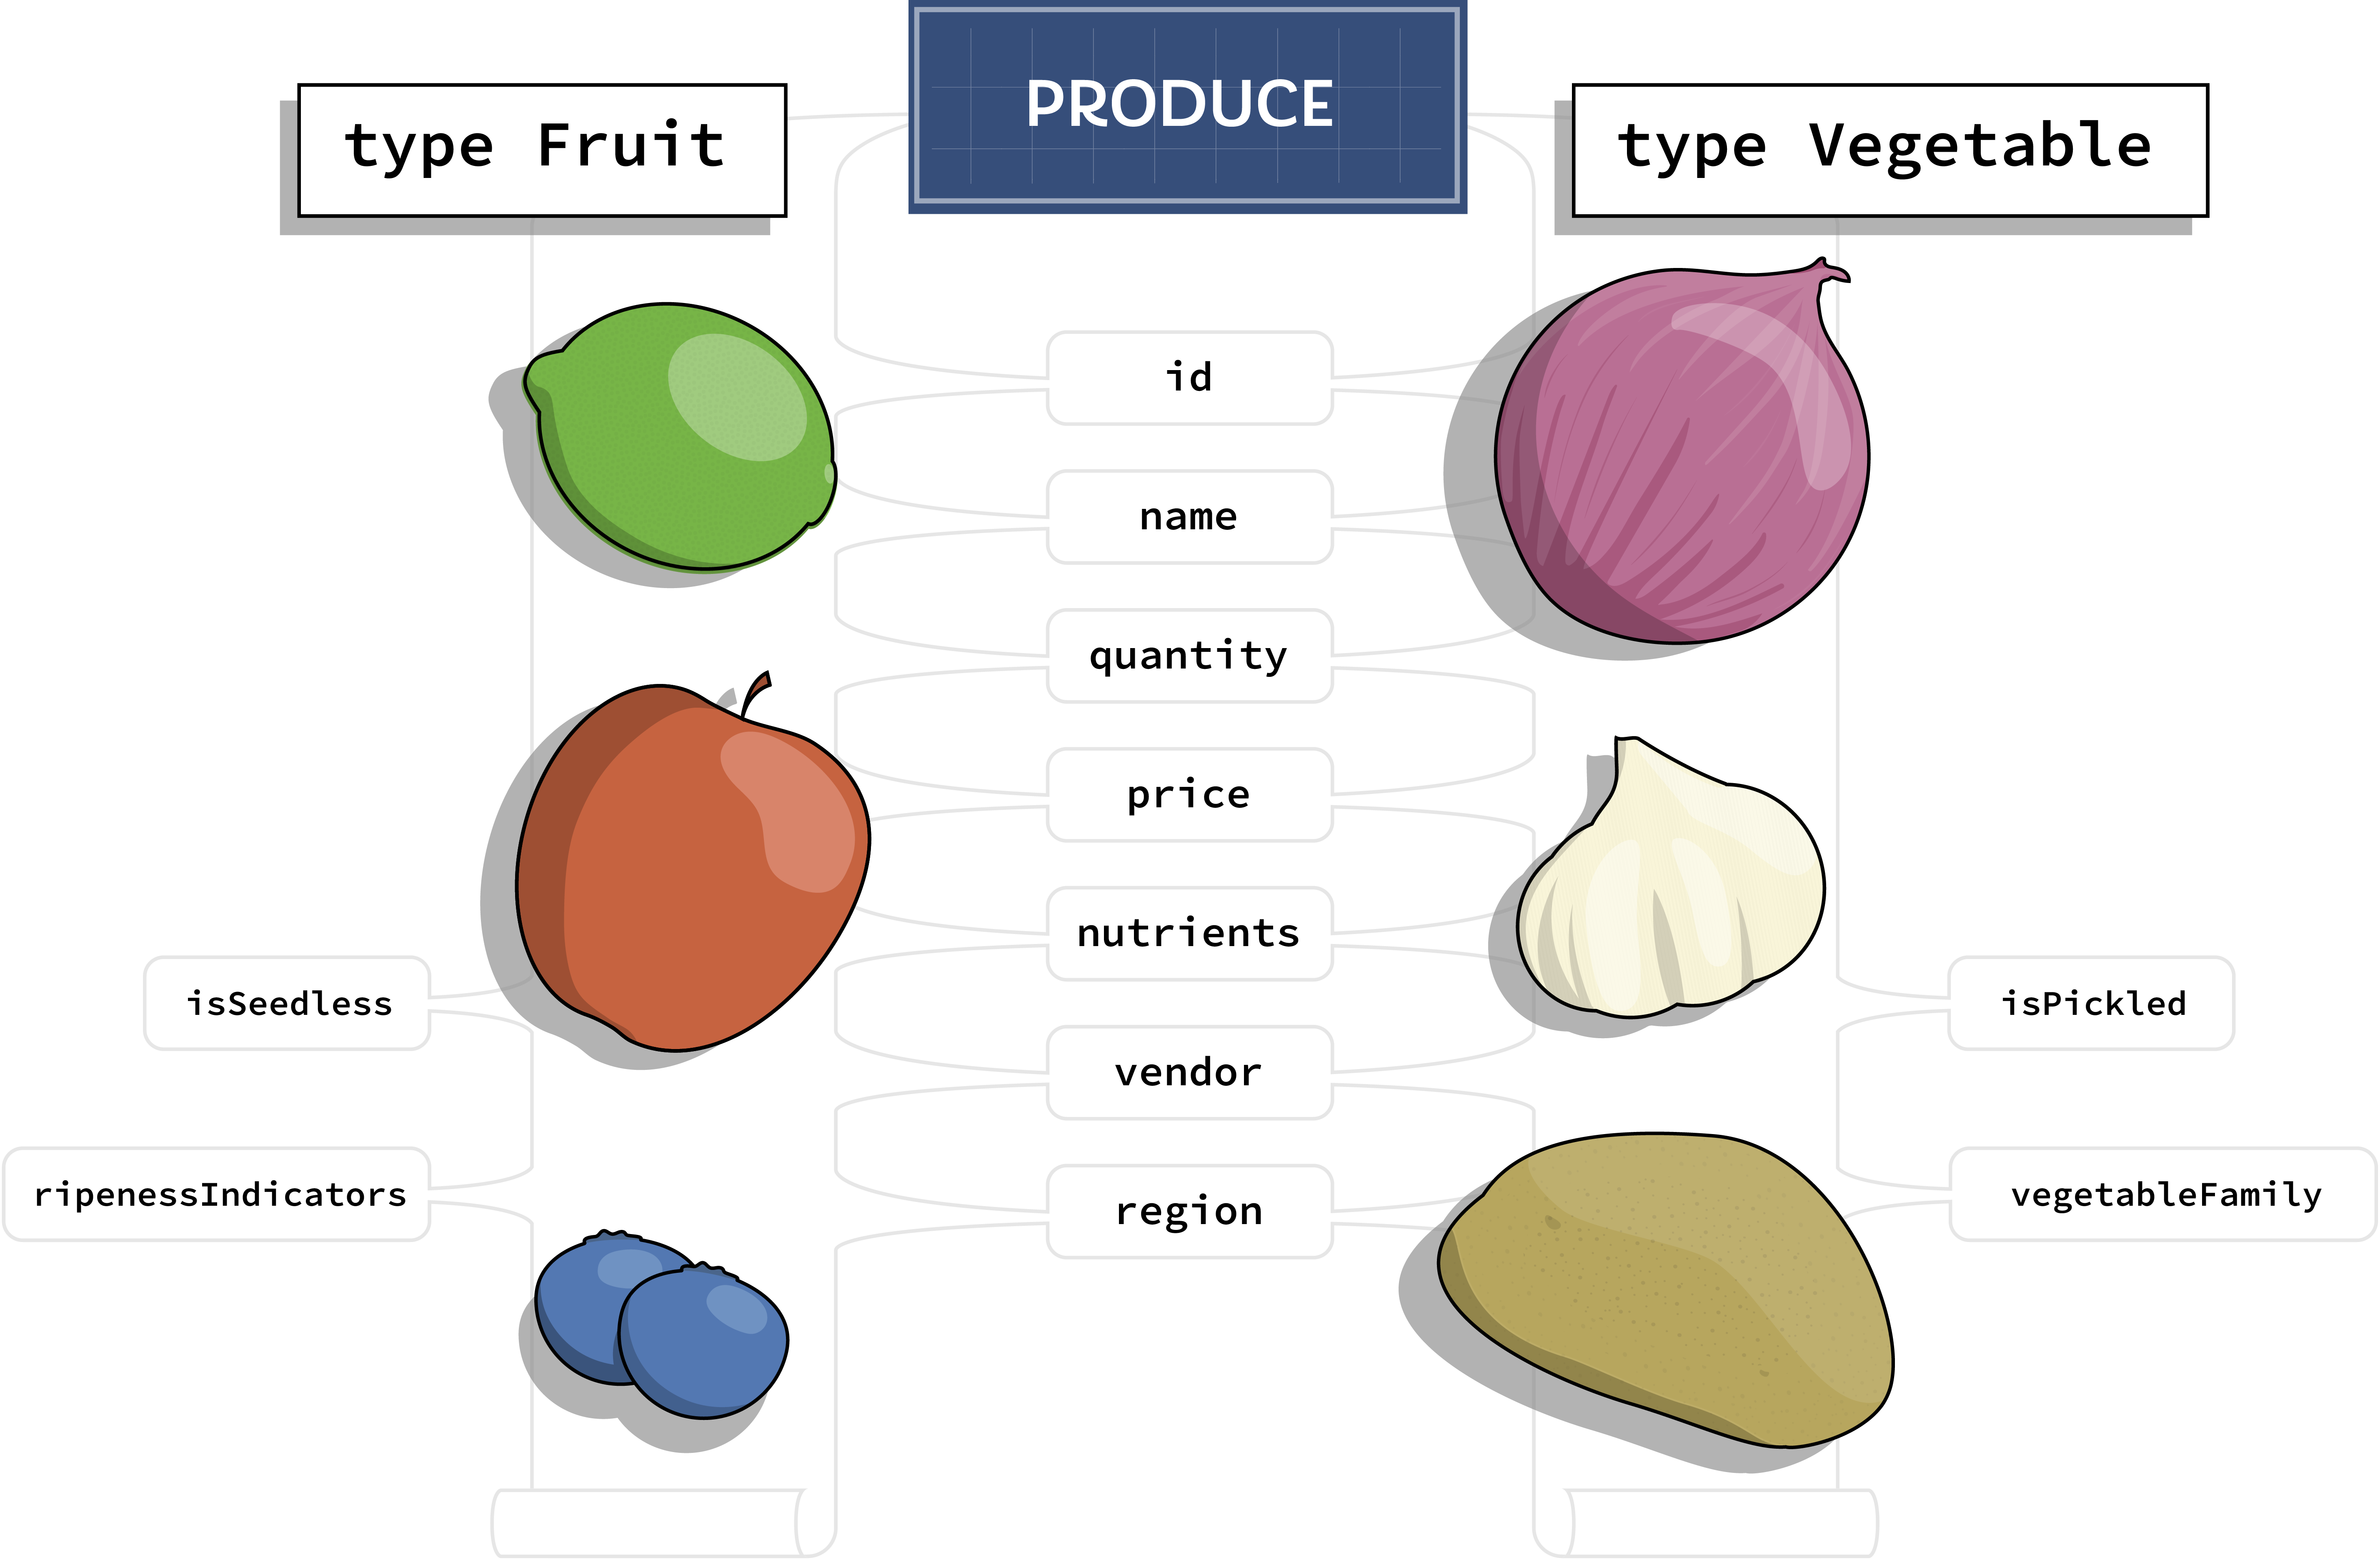 Both the Fruit and Vegetable type derive common fields from the Produce interface, but each defines unique fields the other does not.